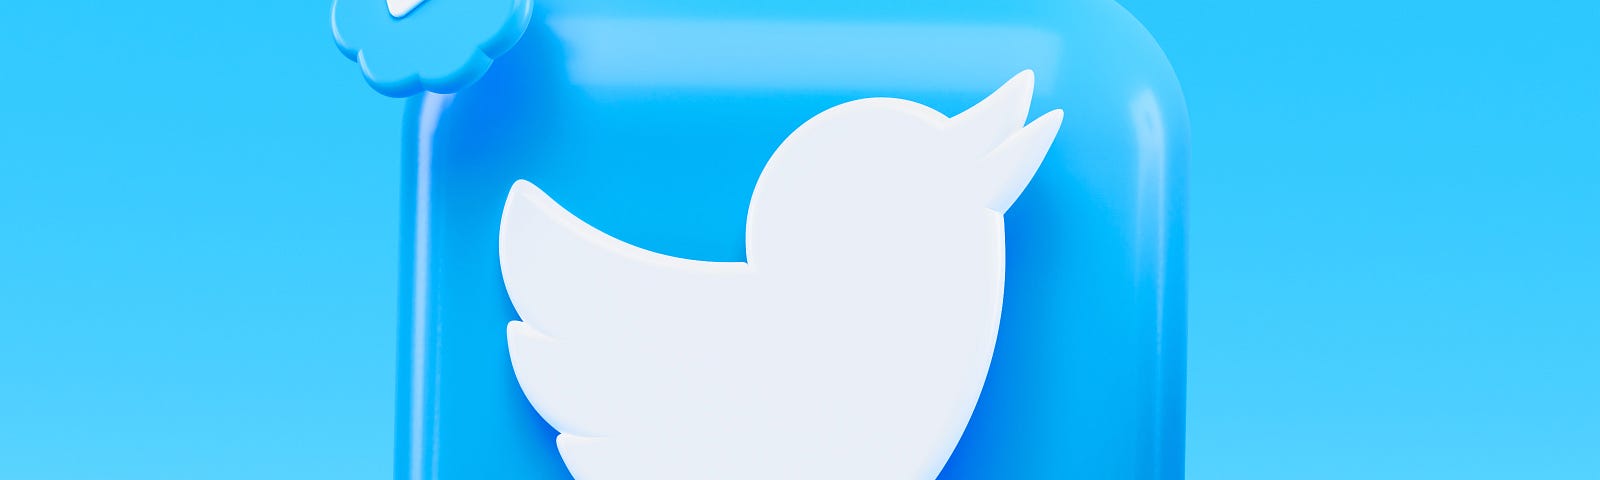 the twitter symbol, that of a tiny bird positioned as if tweeting